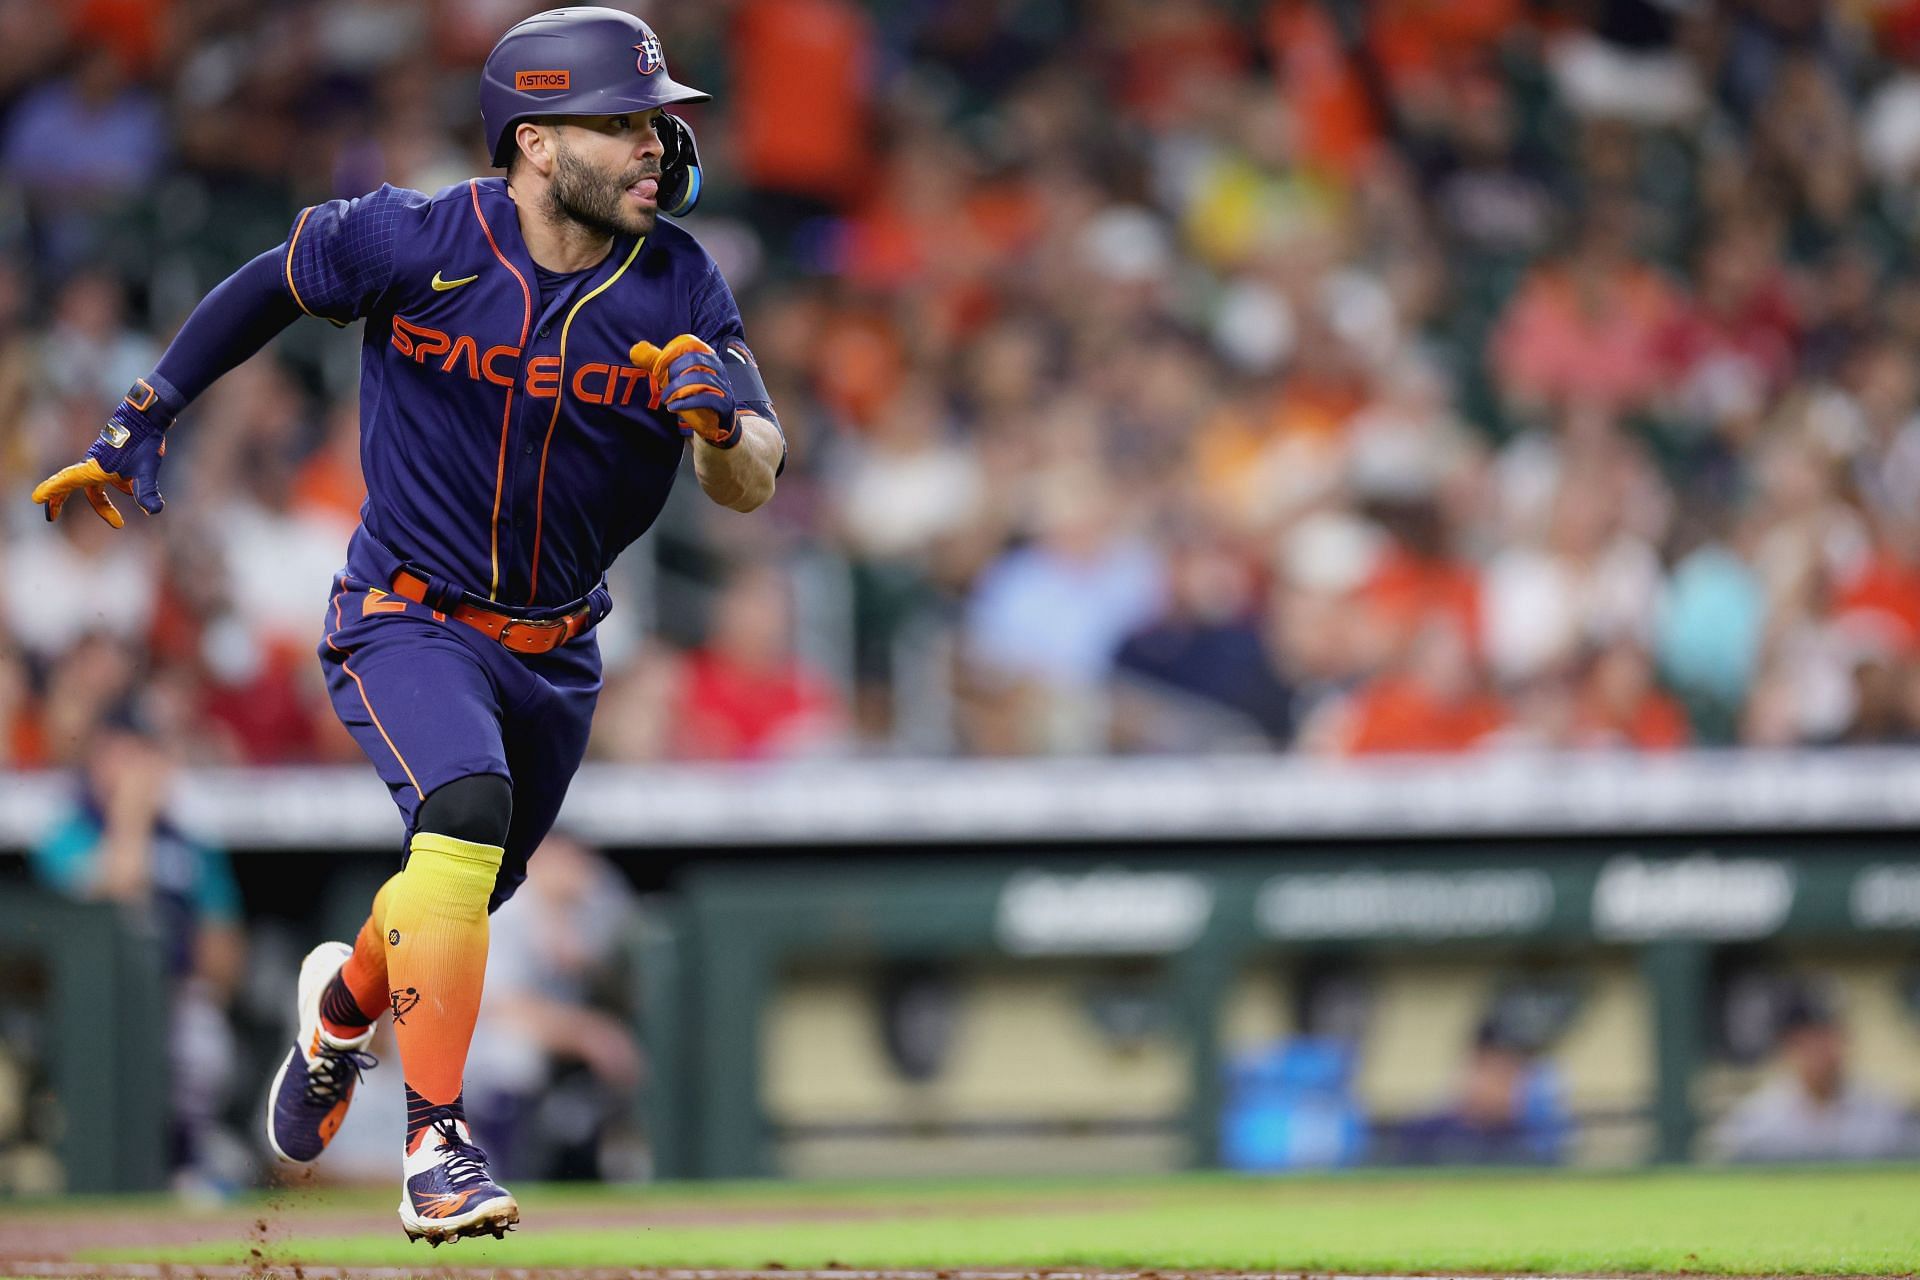 Those cheaters don't move me I'm afraid - Jose Altuve smashes homerun, MLB  fans remain unimpressed with Houston Astros